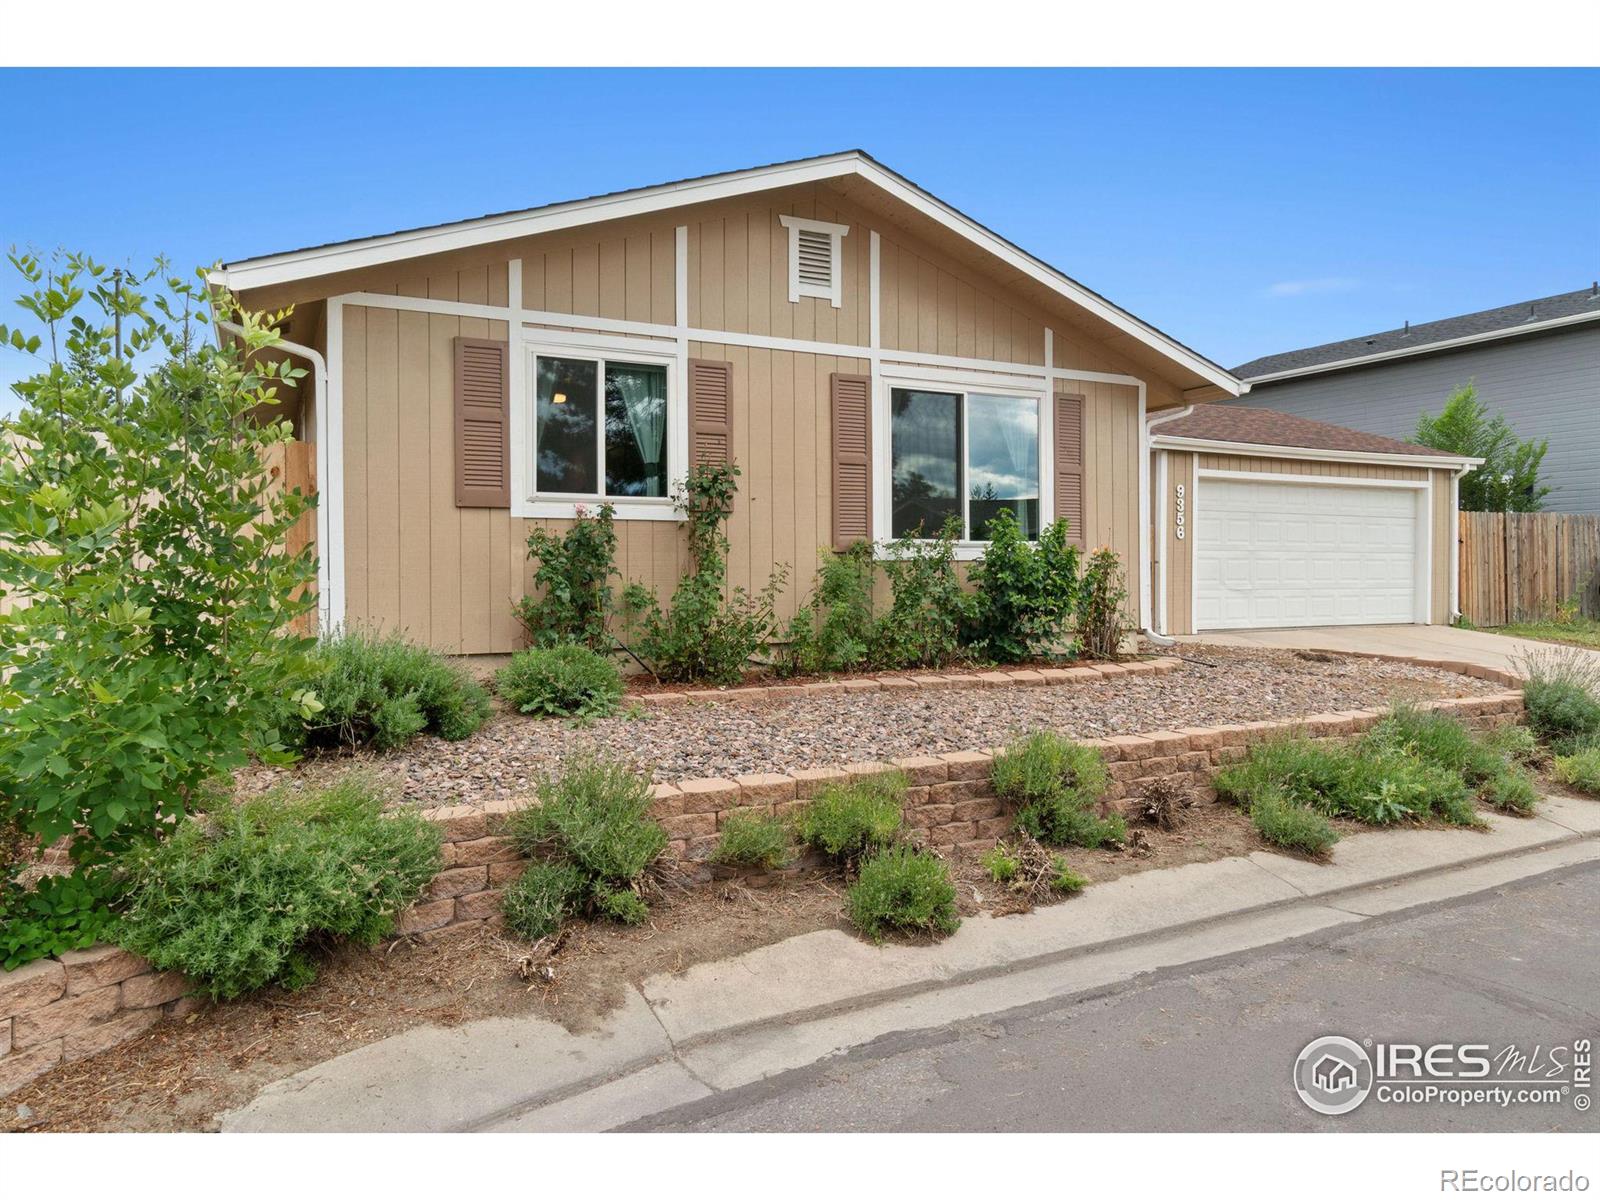 Report Image for 9356  Ingalls Street,Westminster, Colorado